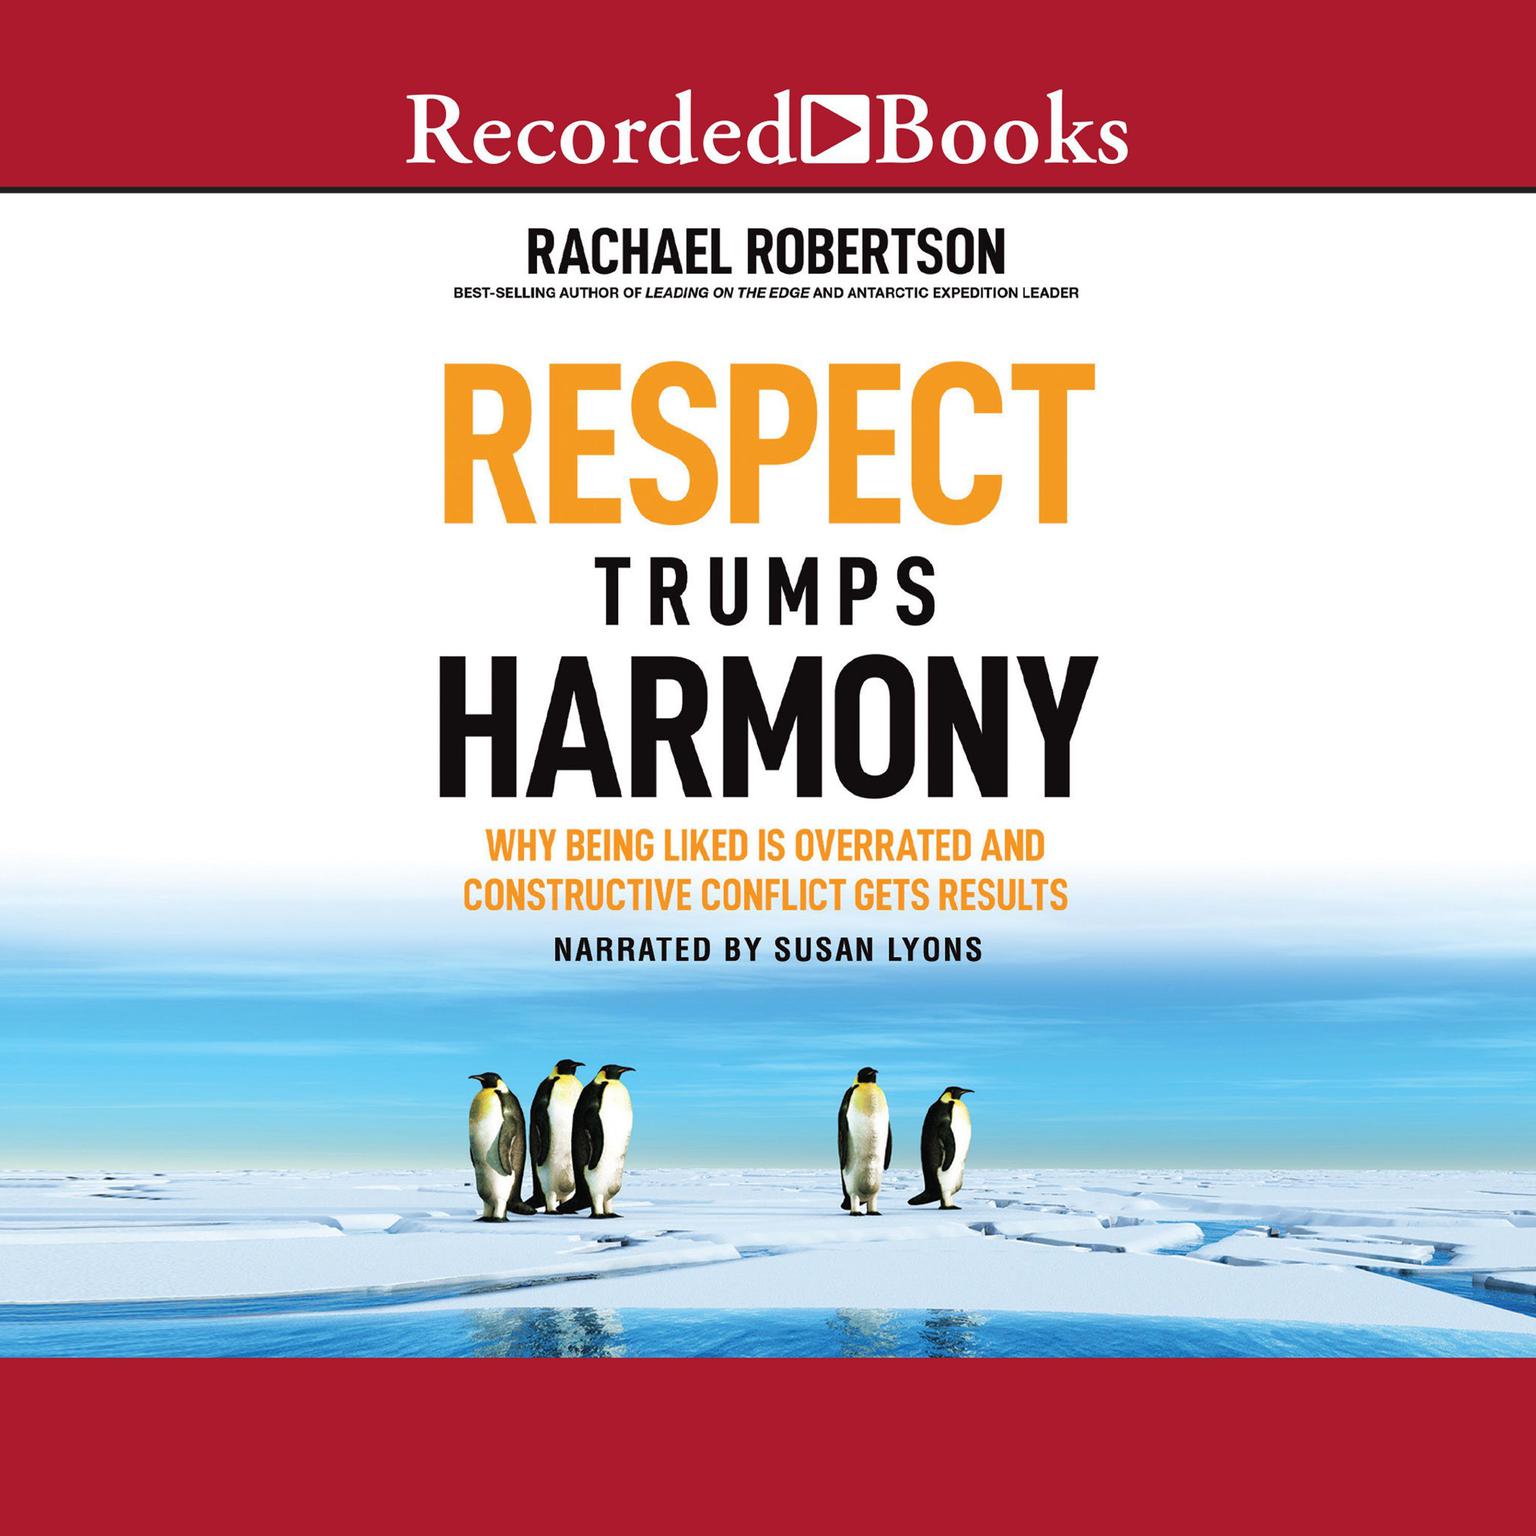 Respect Trumps Harmony: Why Being Liked is Overrated and Constructive Conflict Gets Results Audiobook, by Rachael Robertson